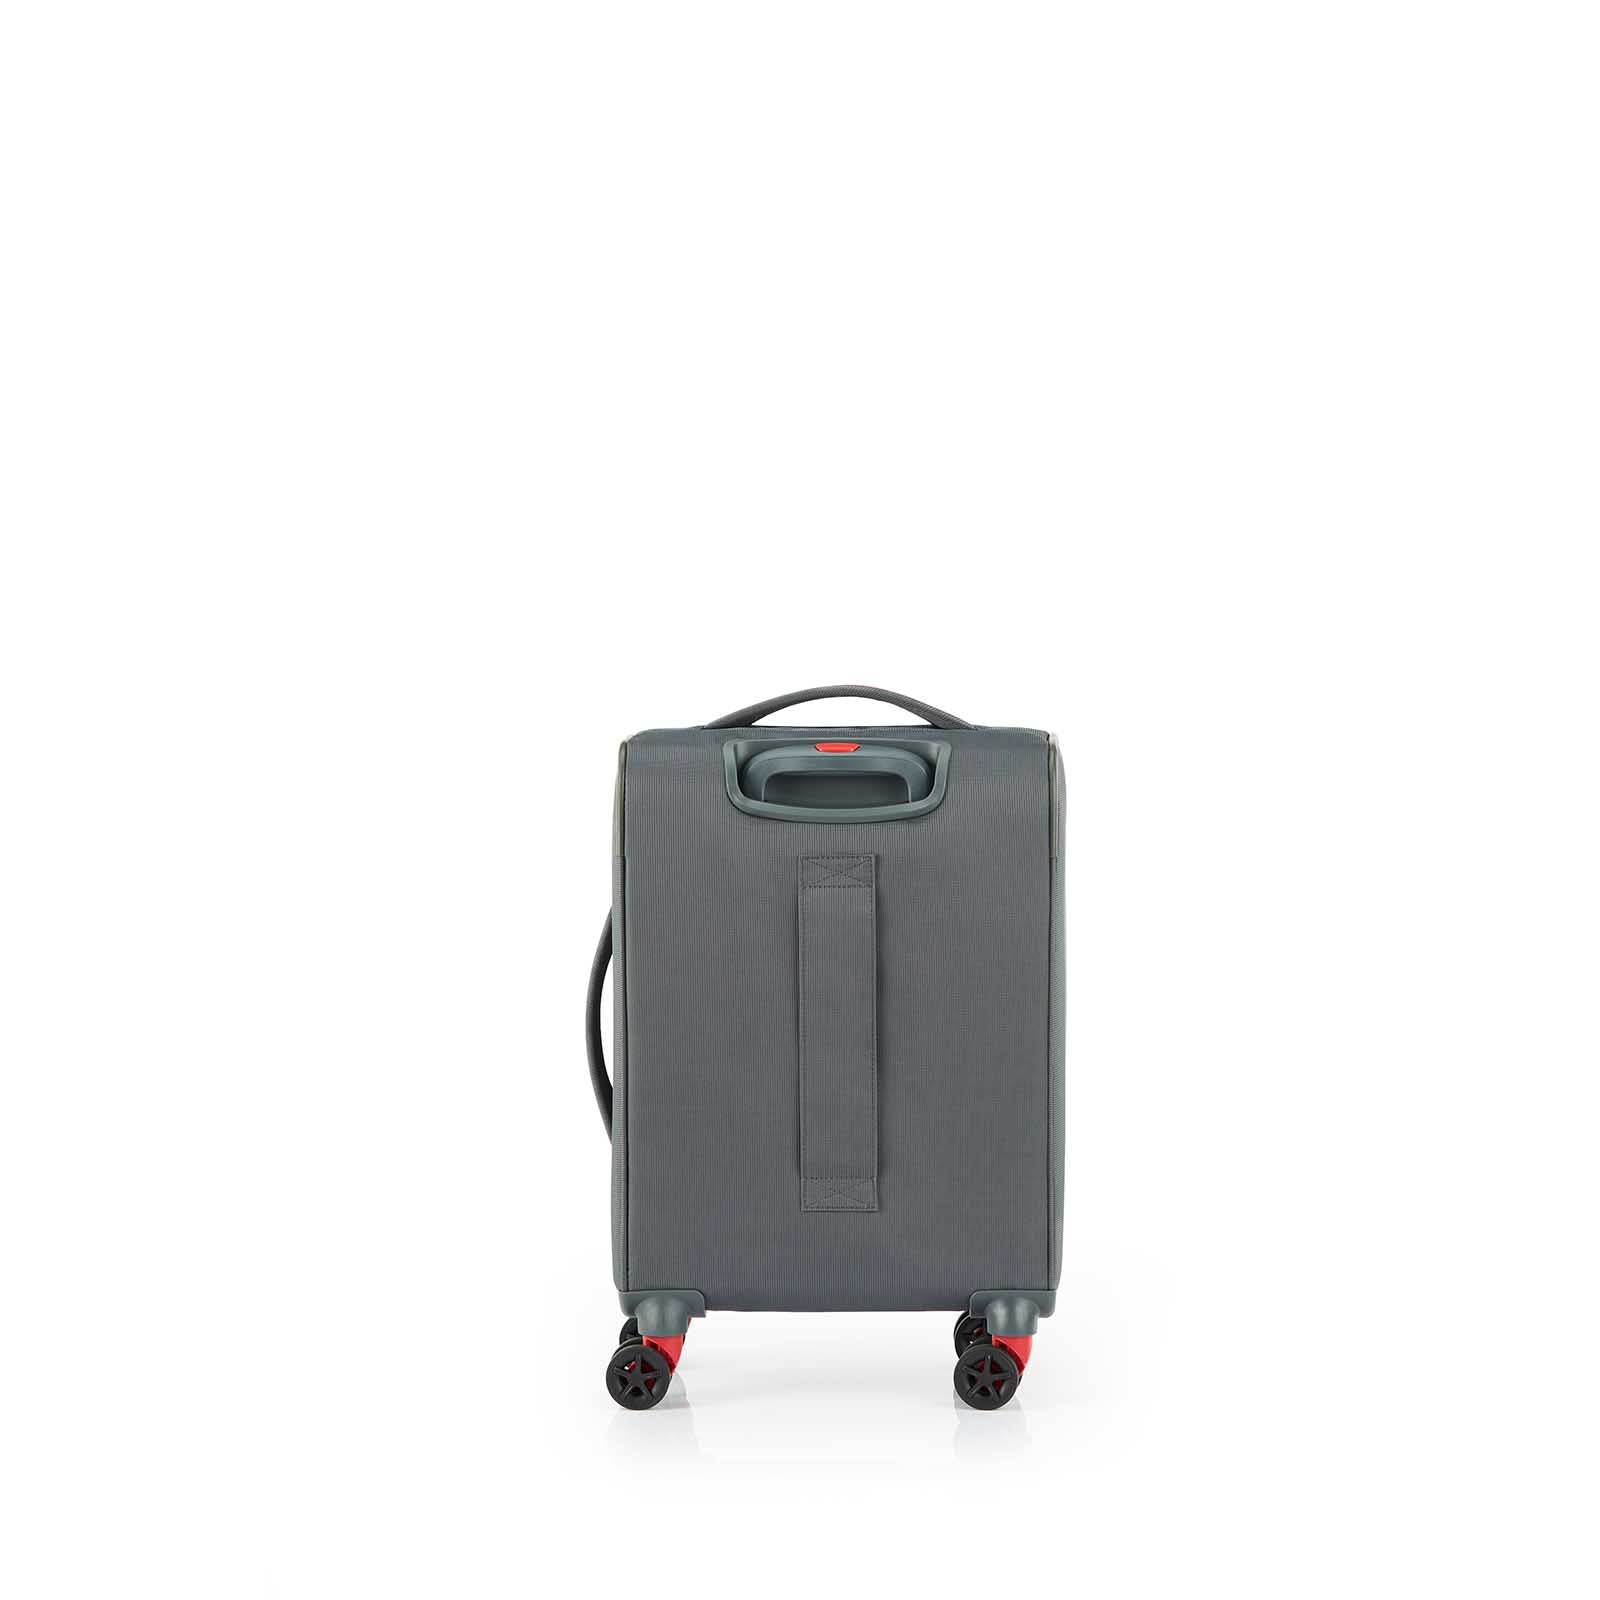 American-Tourister-Applite-4-Eco-55cm-Carry-On-Suitcase-Grey-Red-Smart-Sleeve